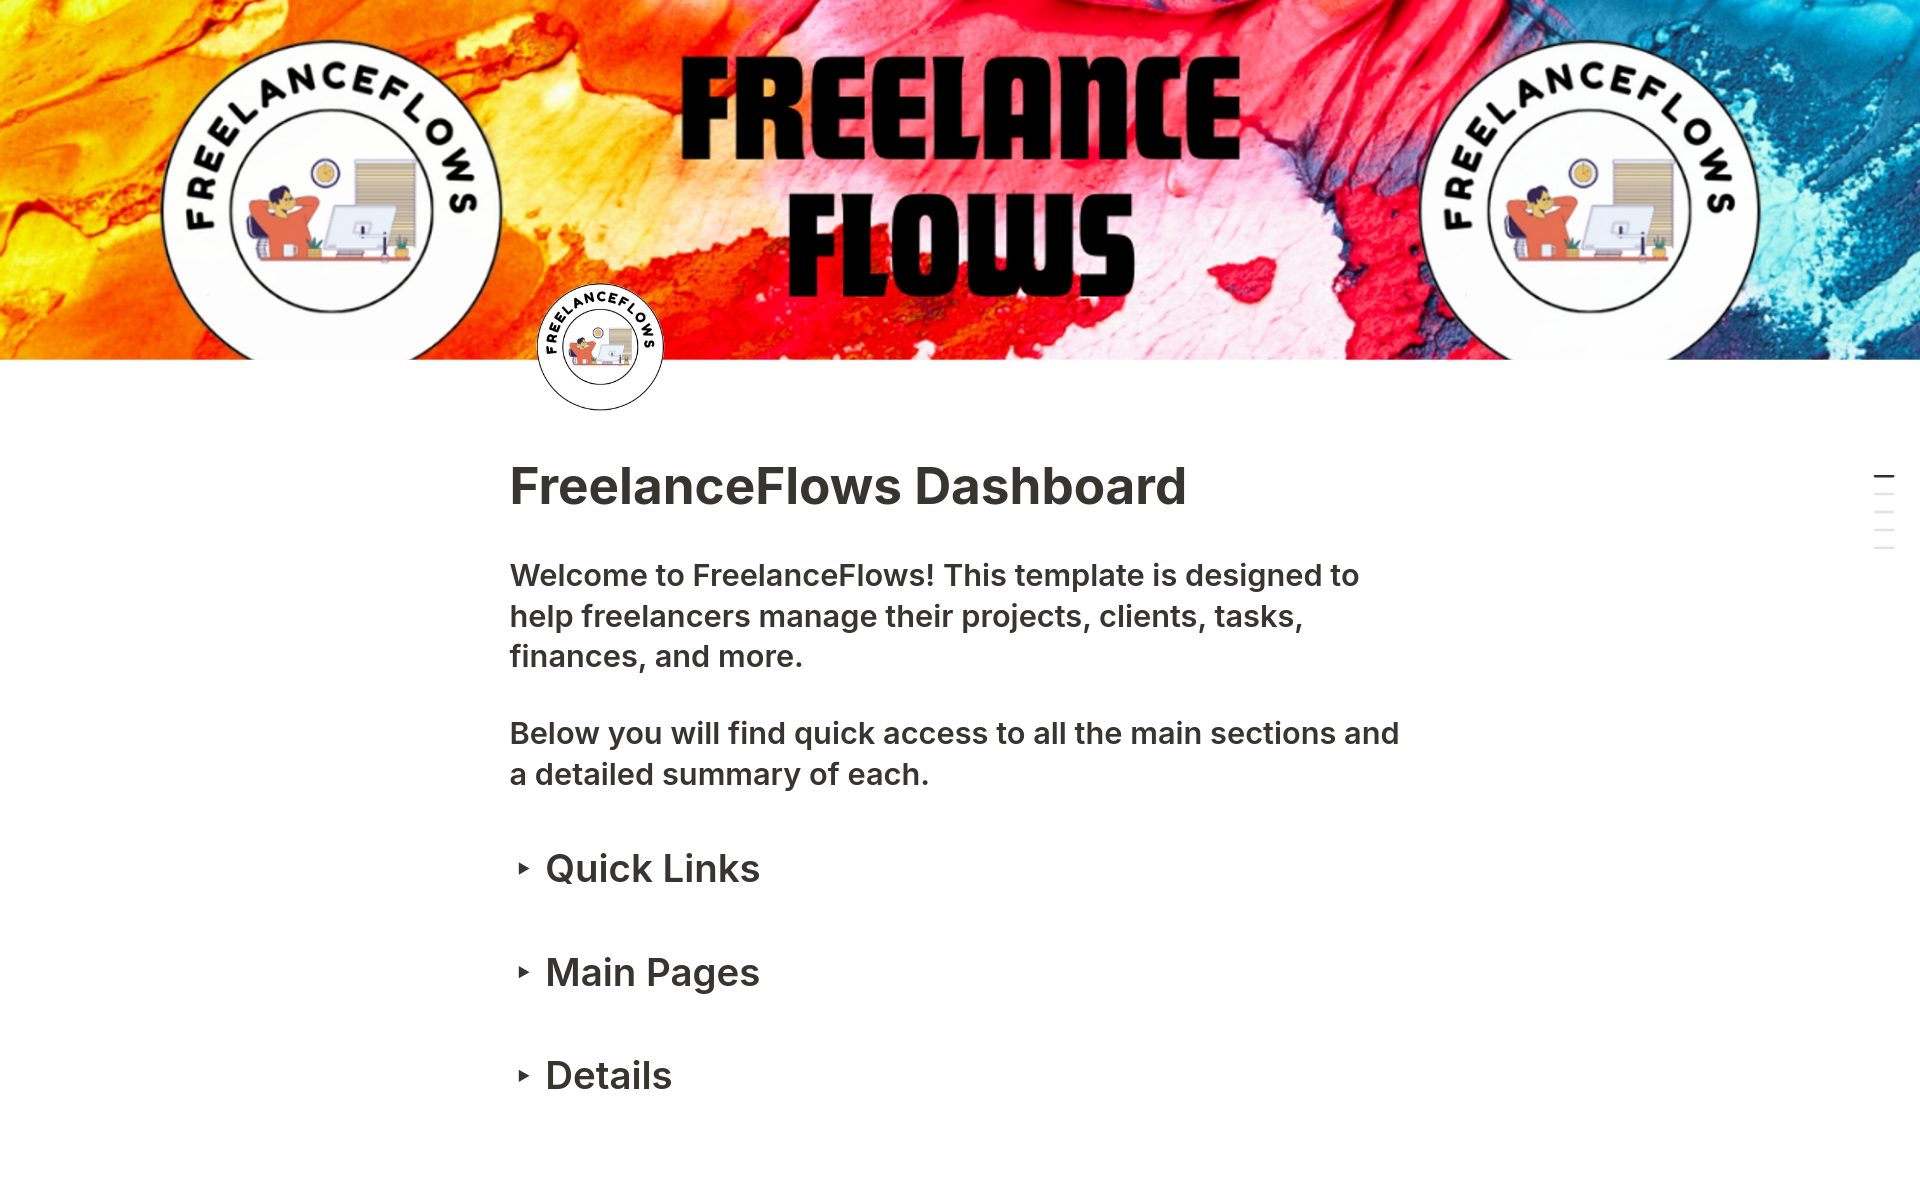 FreelanceFlows offers task management, project tracking, client management, meeting notes, financial records, project milestones, follow-up management, and time tracking. Ideal for freelancers to stay organized and productive.